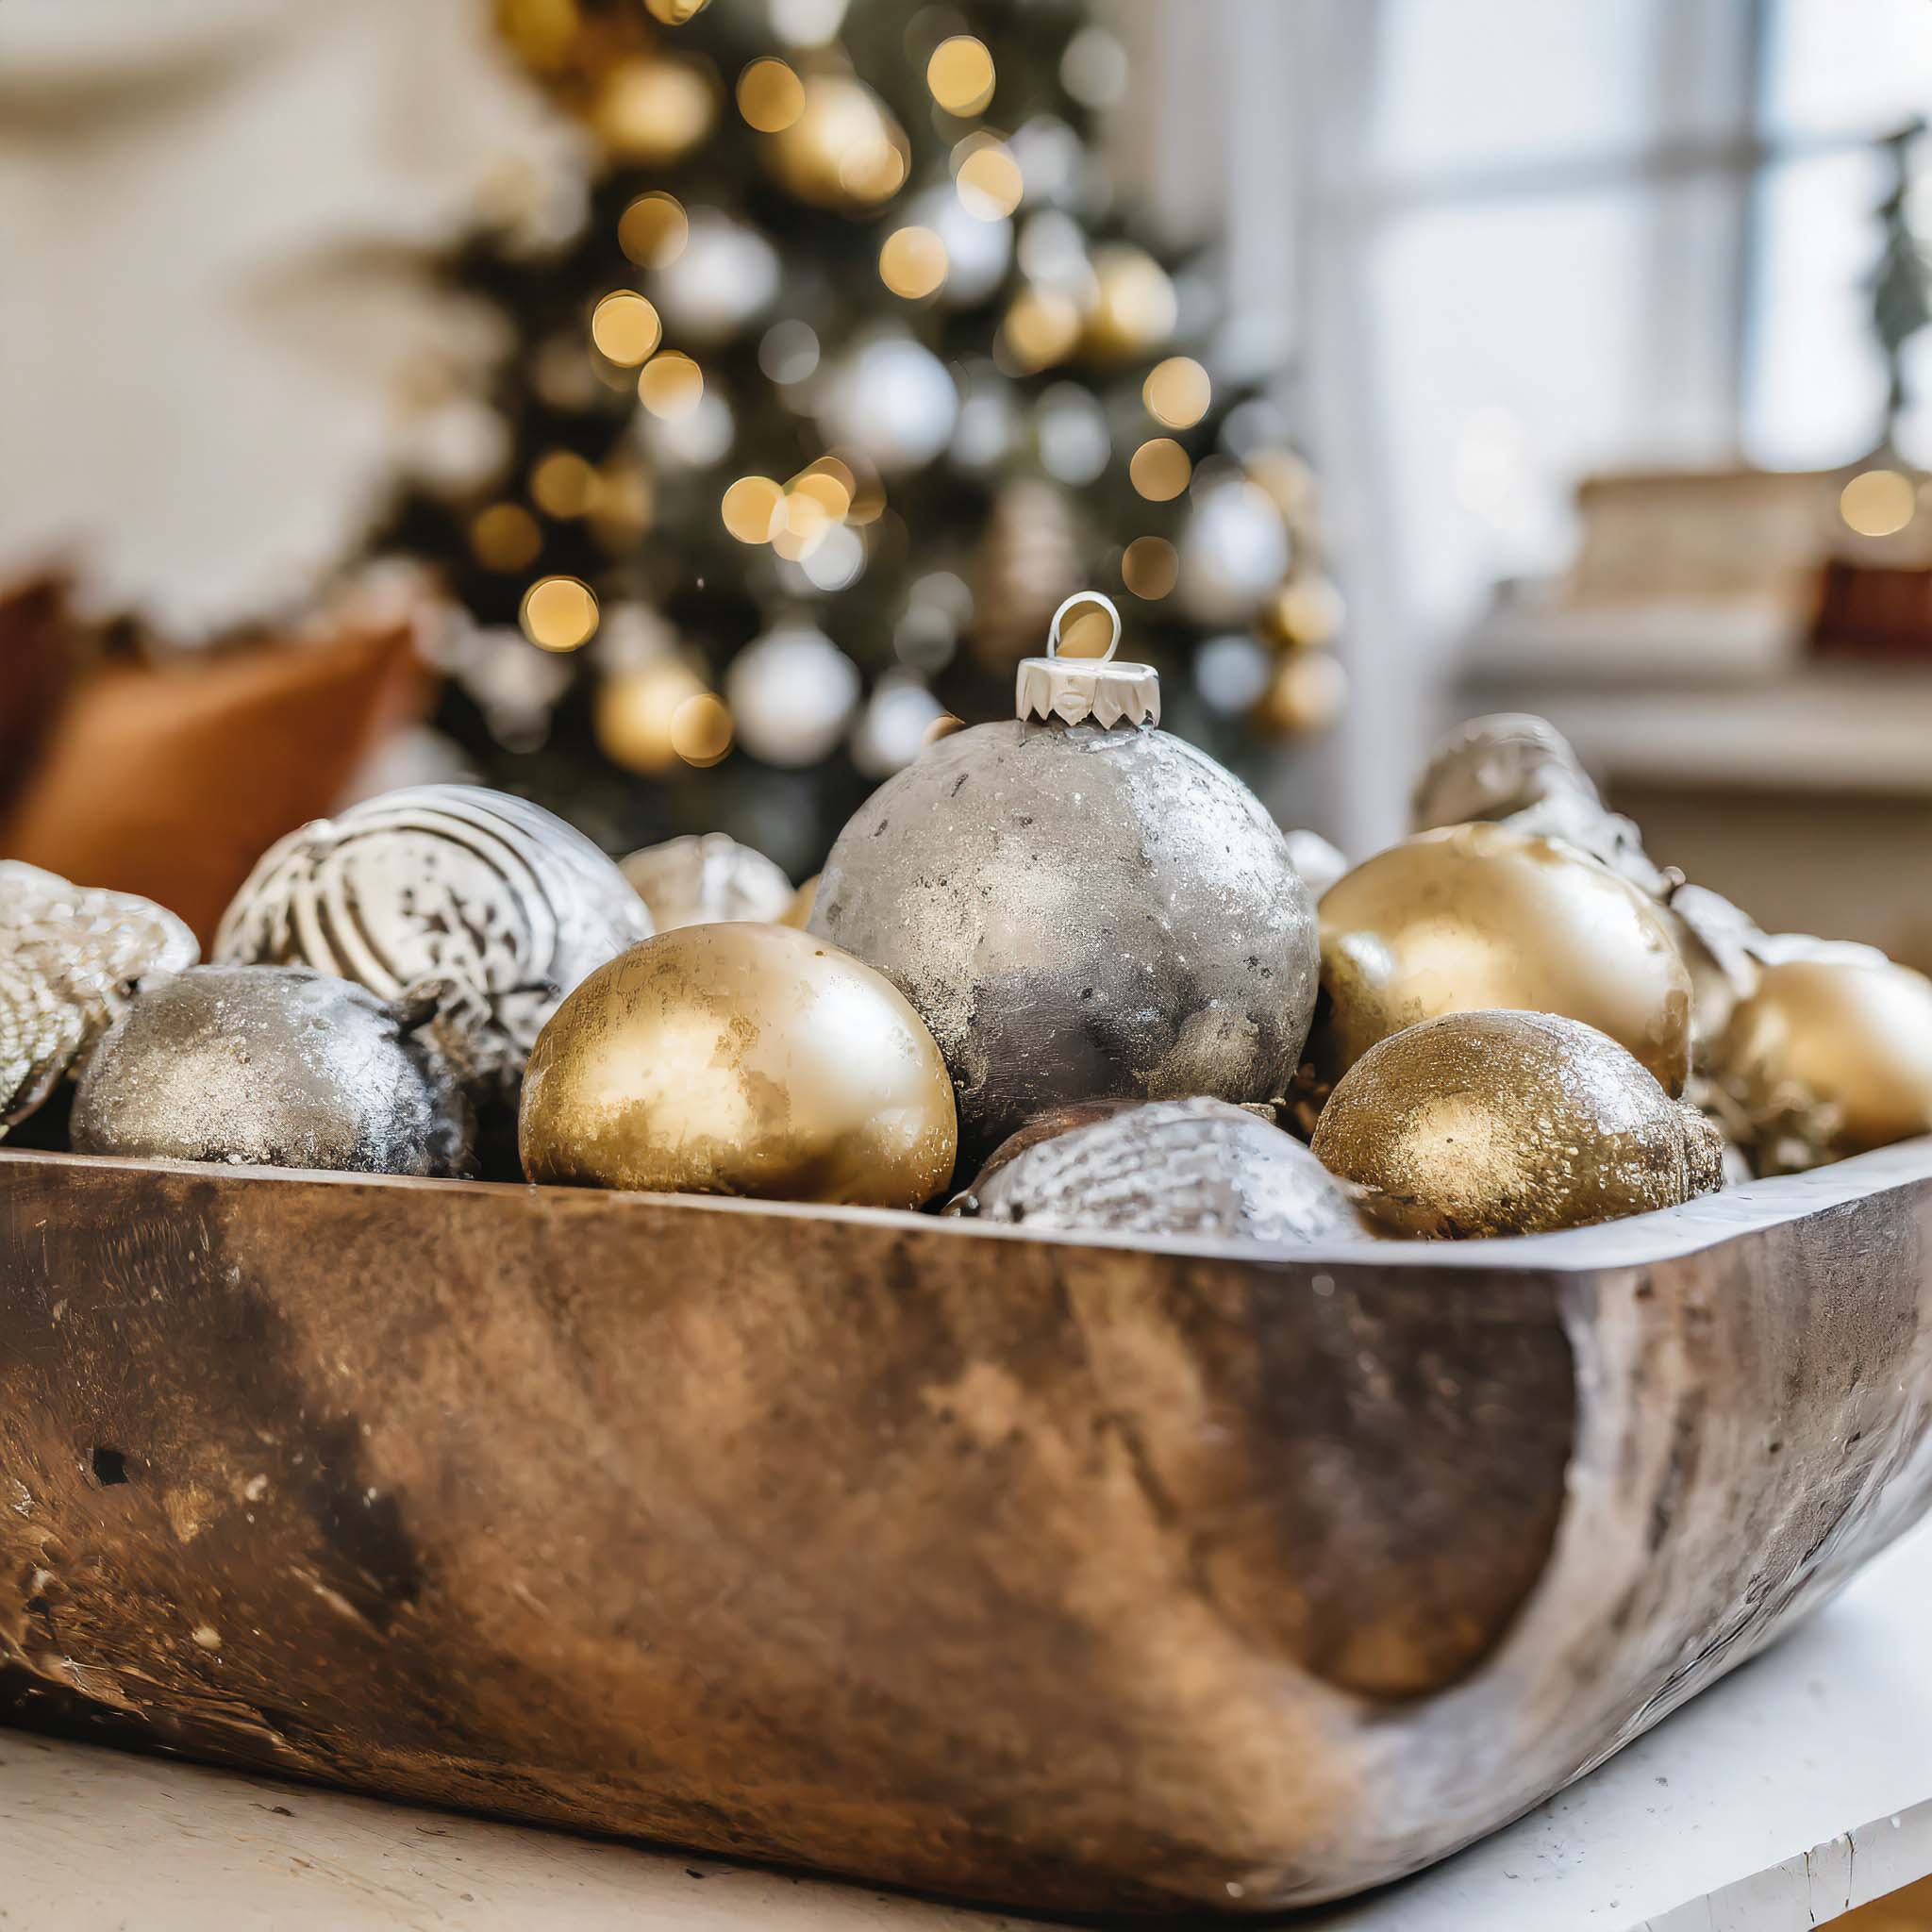 Wooden dough bowl filled with vintage silver and gold ornaments with Christmas tree in the background.